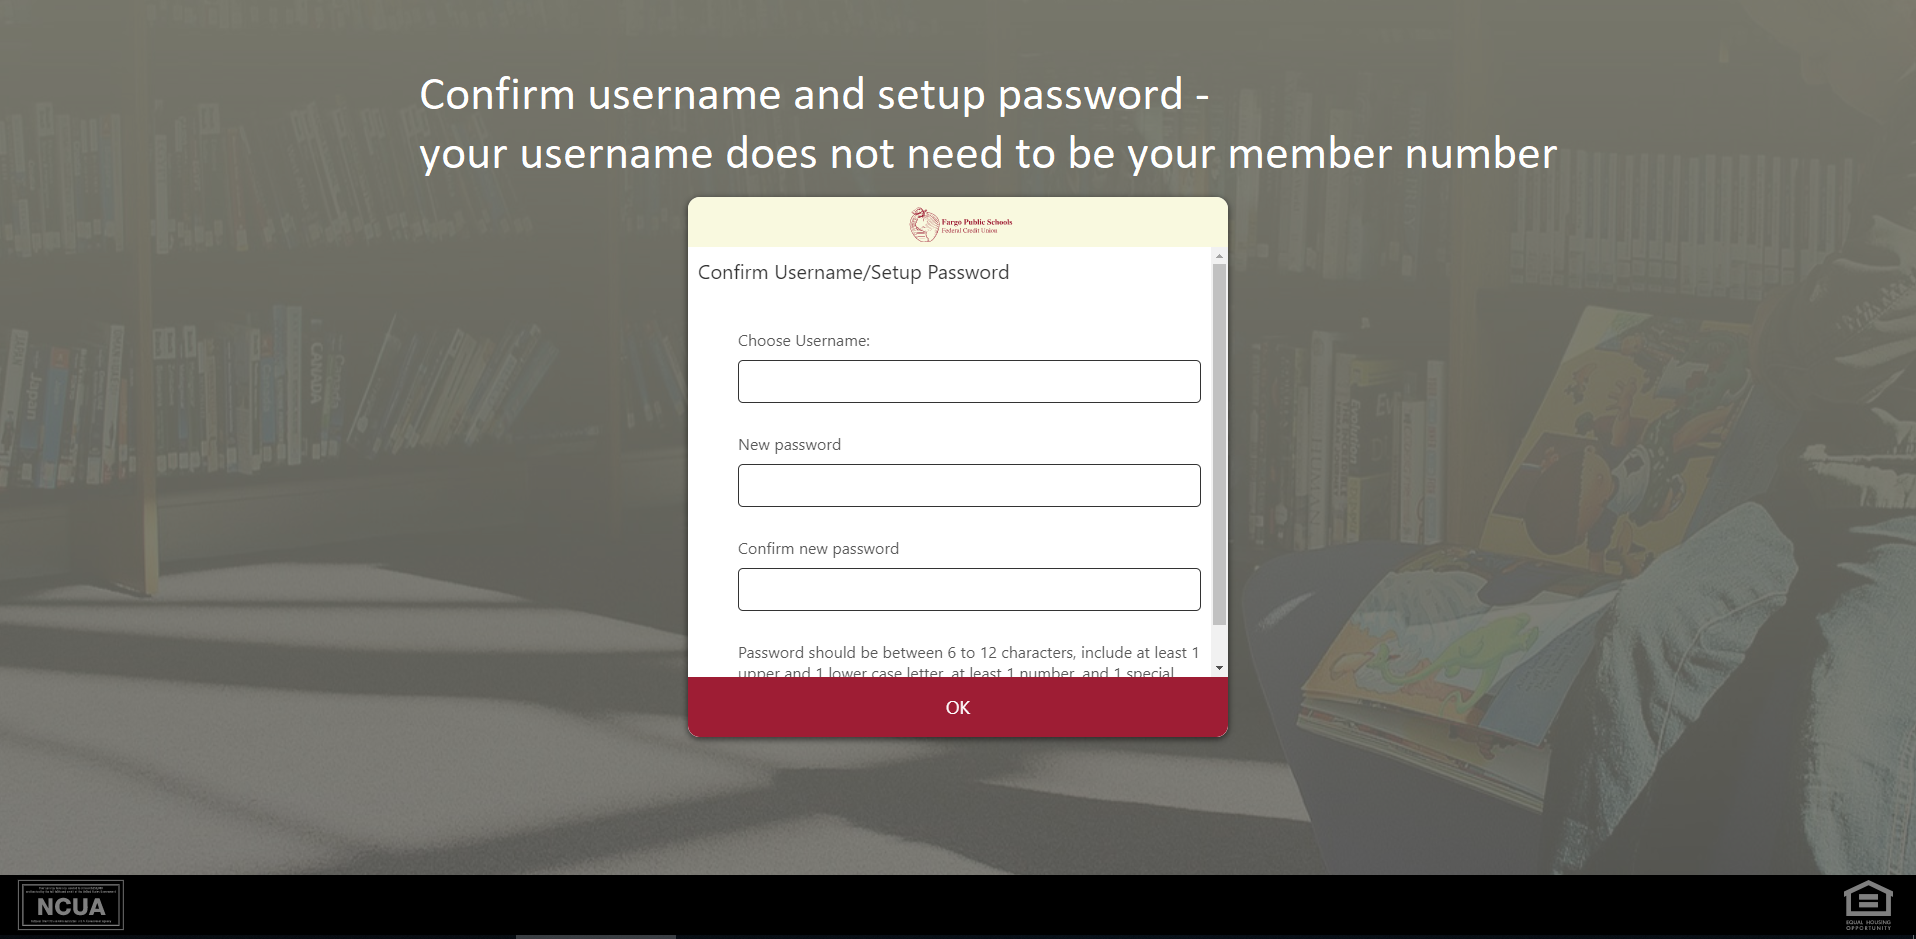 Screen shot of confirm username and set up password screen - Confirm username and set up password.